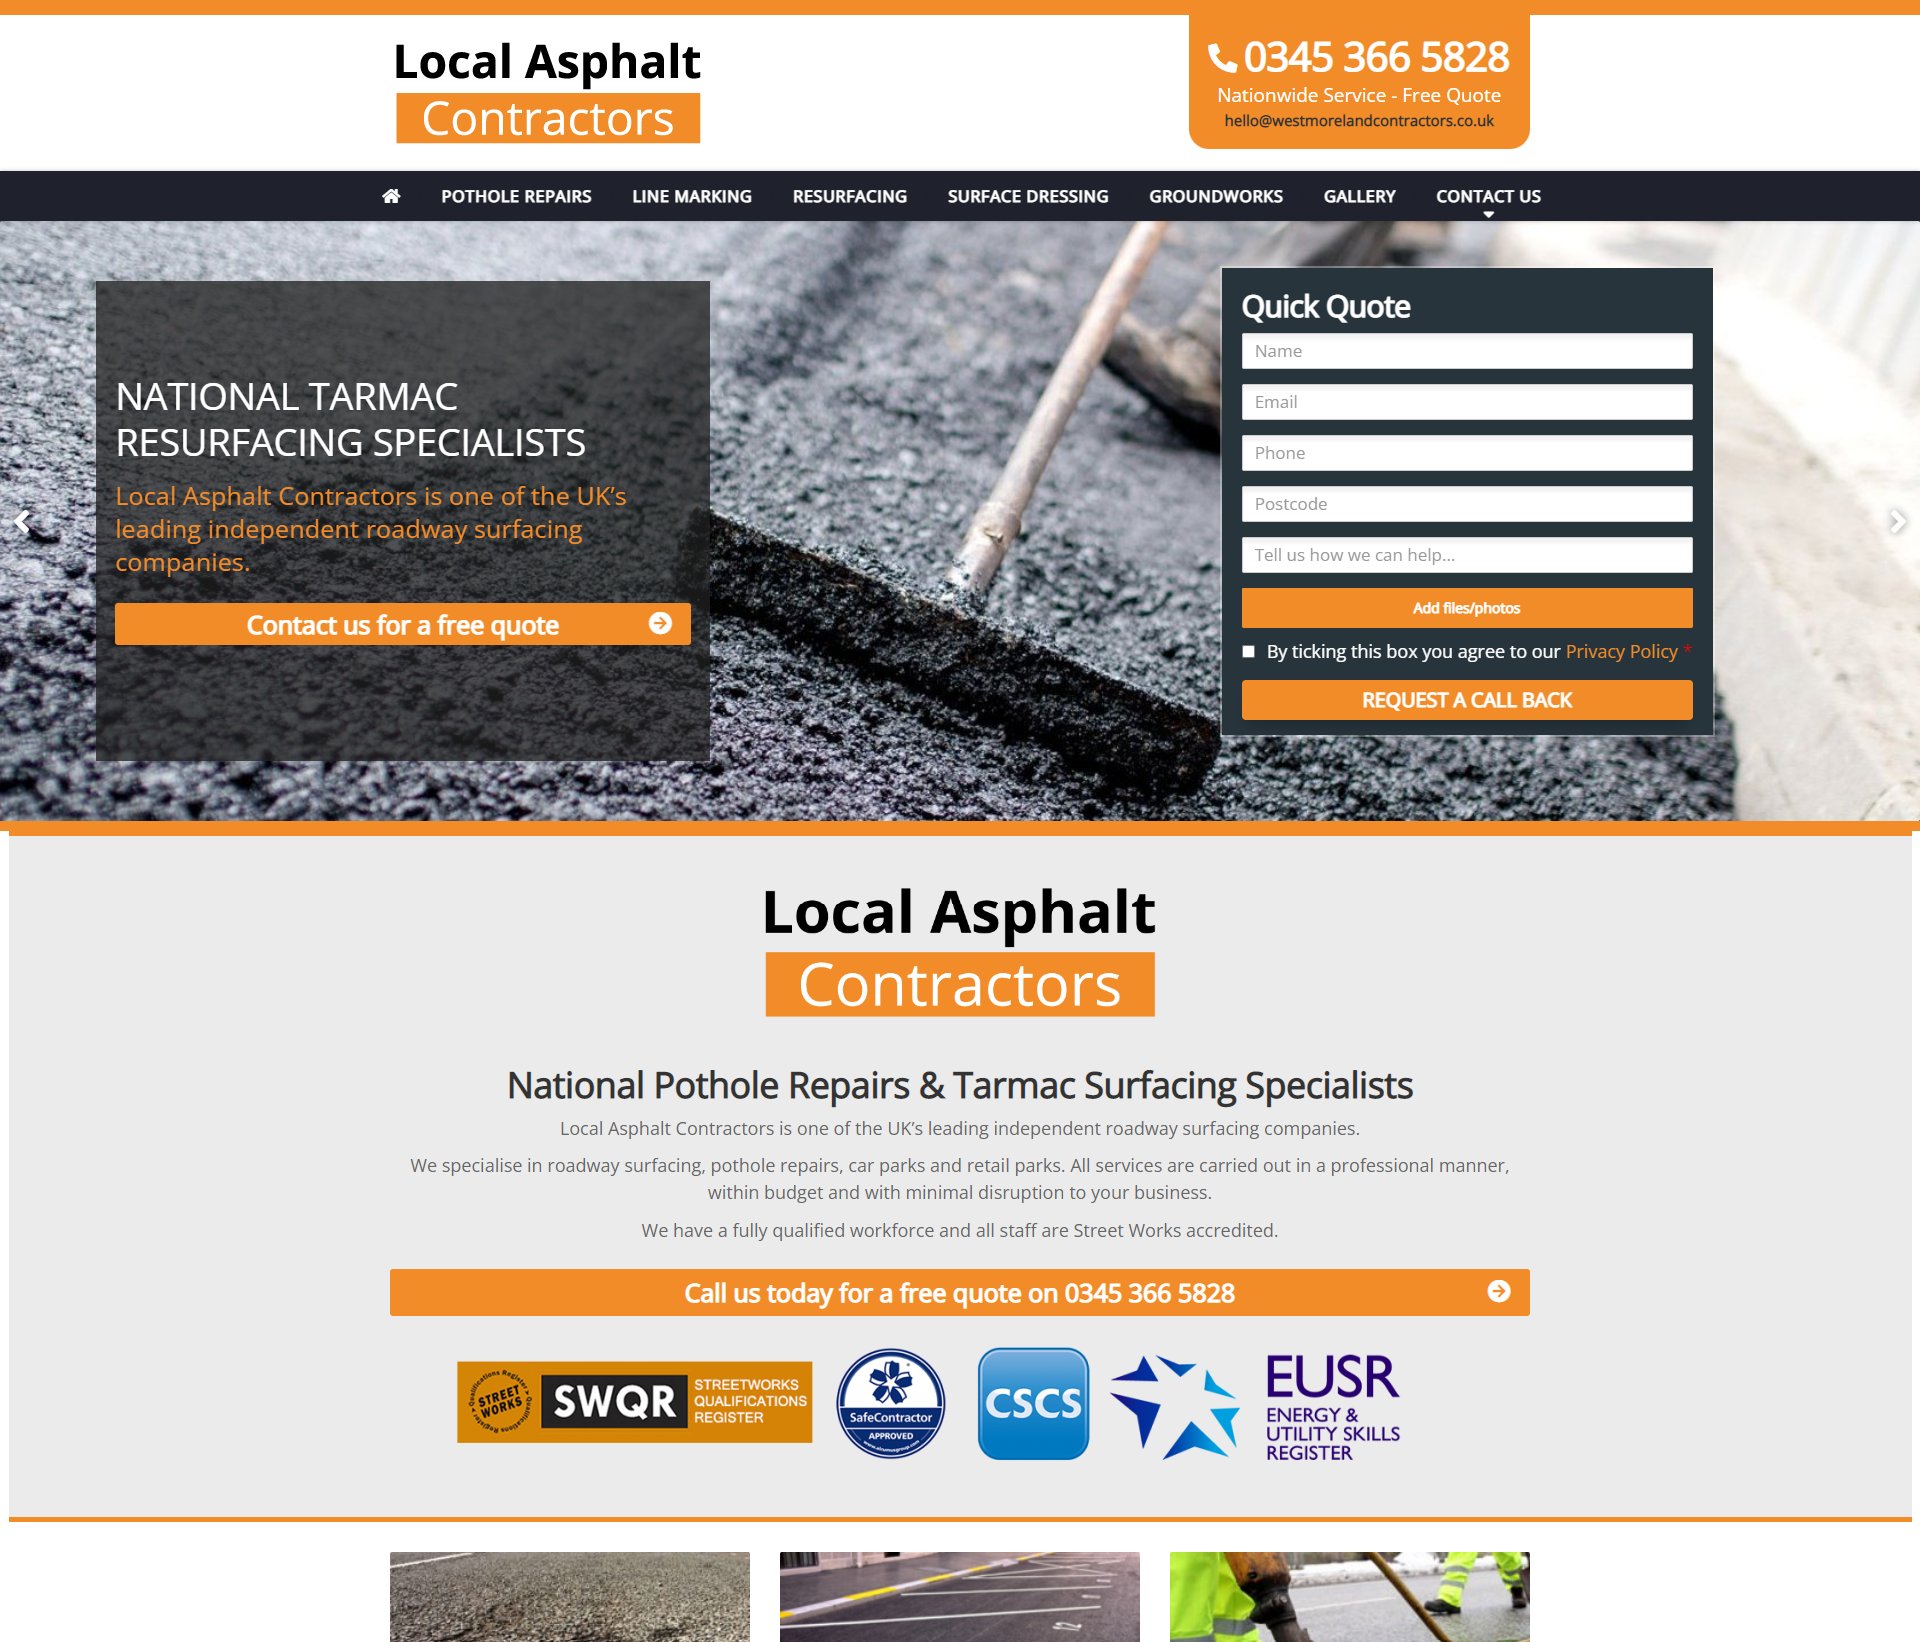 Web Design Company for road surfacing [city]